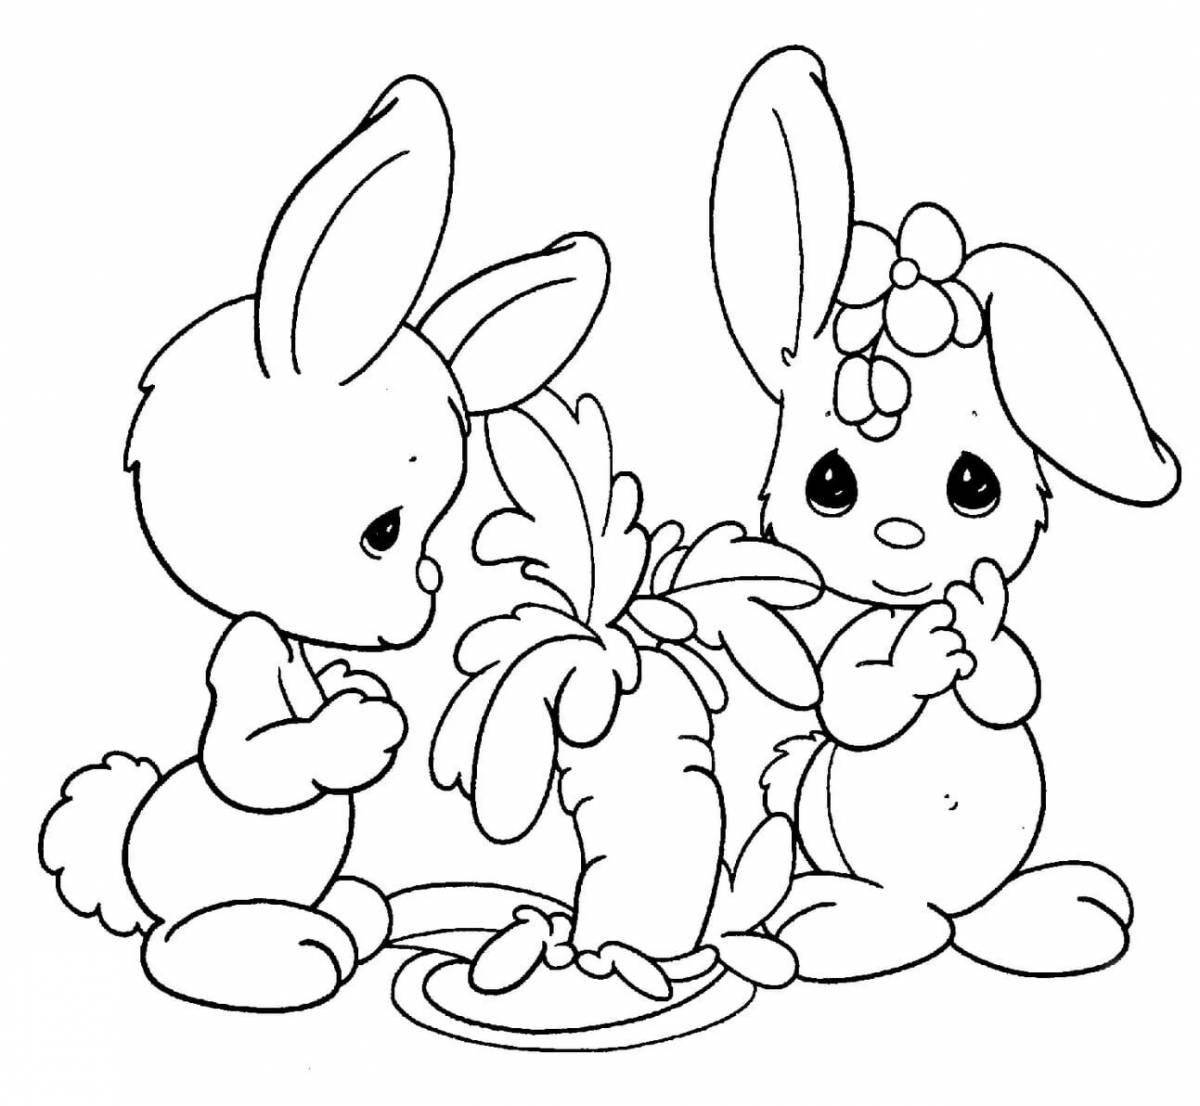 Coloring book magic hare for children 6-7 years old